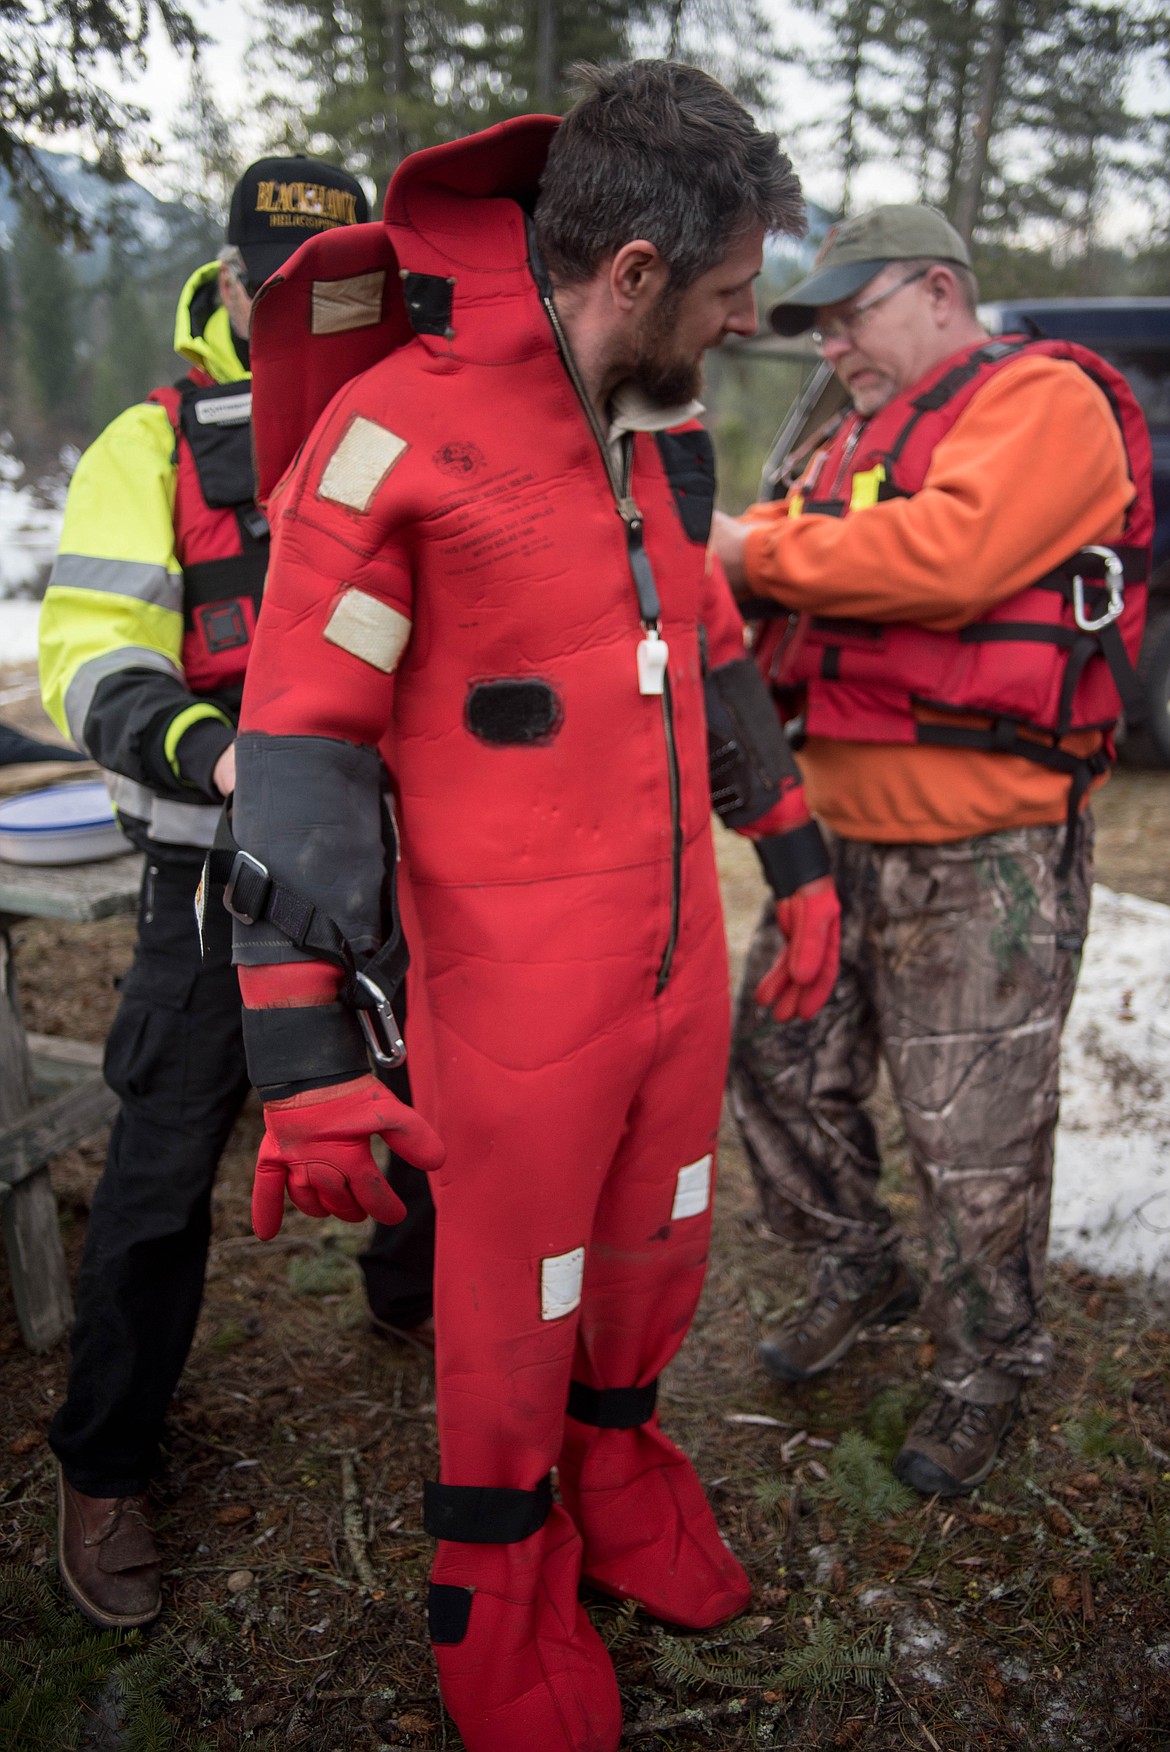 Justin Slobuszewski, gets help putting on his ice rescue suit at a seasonal rescue training exercise for David Thompson Search and Rescue crew members, Saturday at Throop Lake. (Luke Hollister/The Western News)